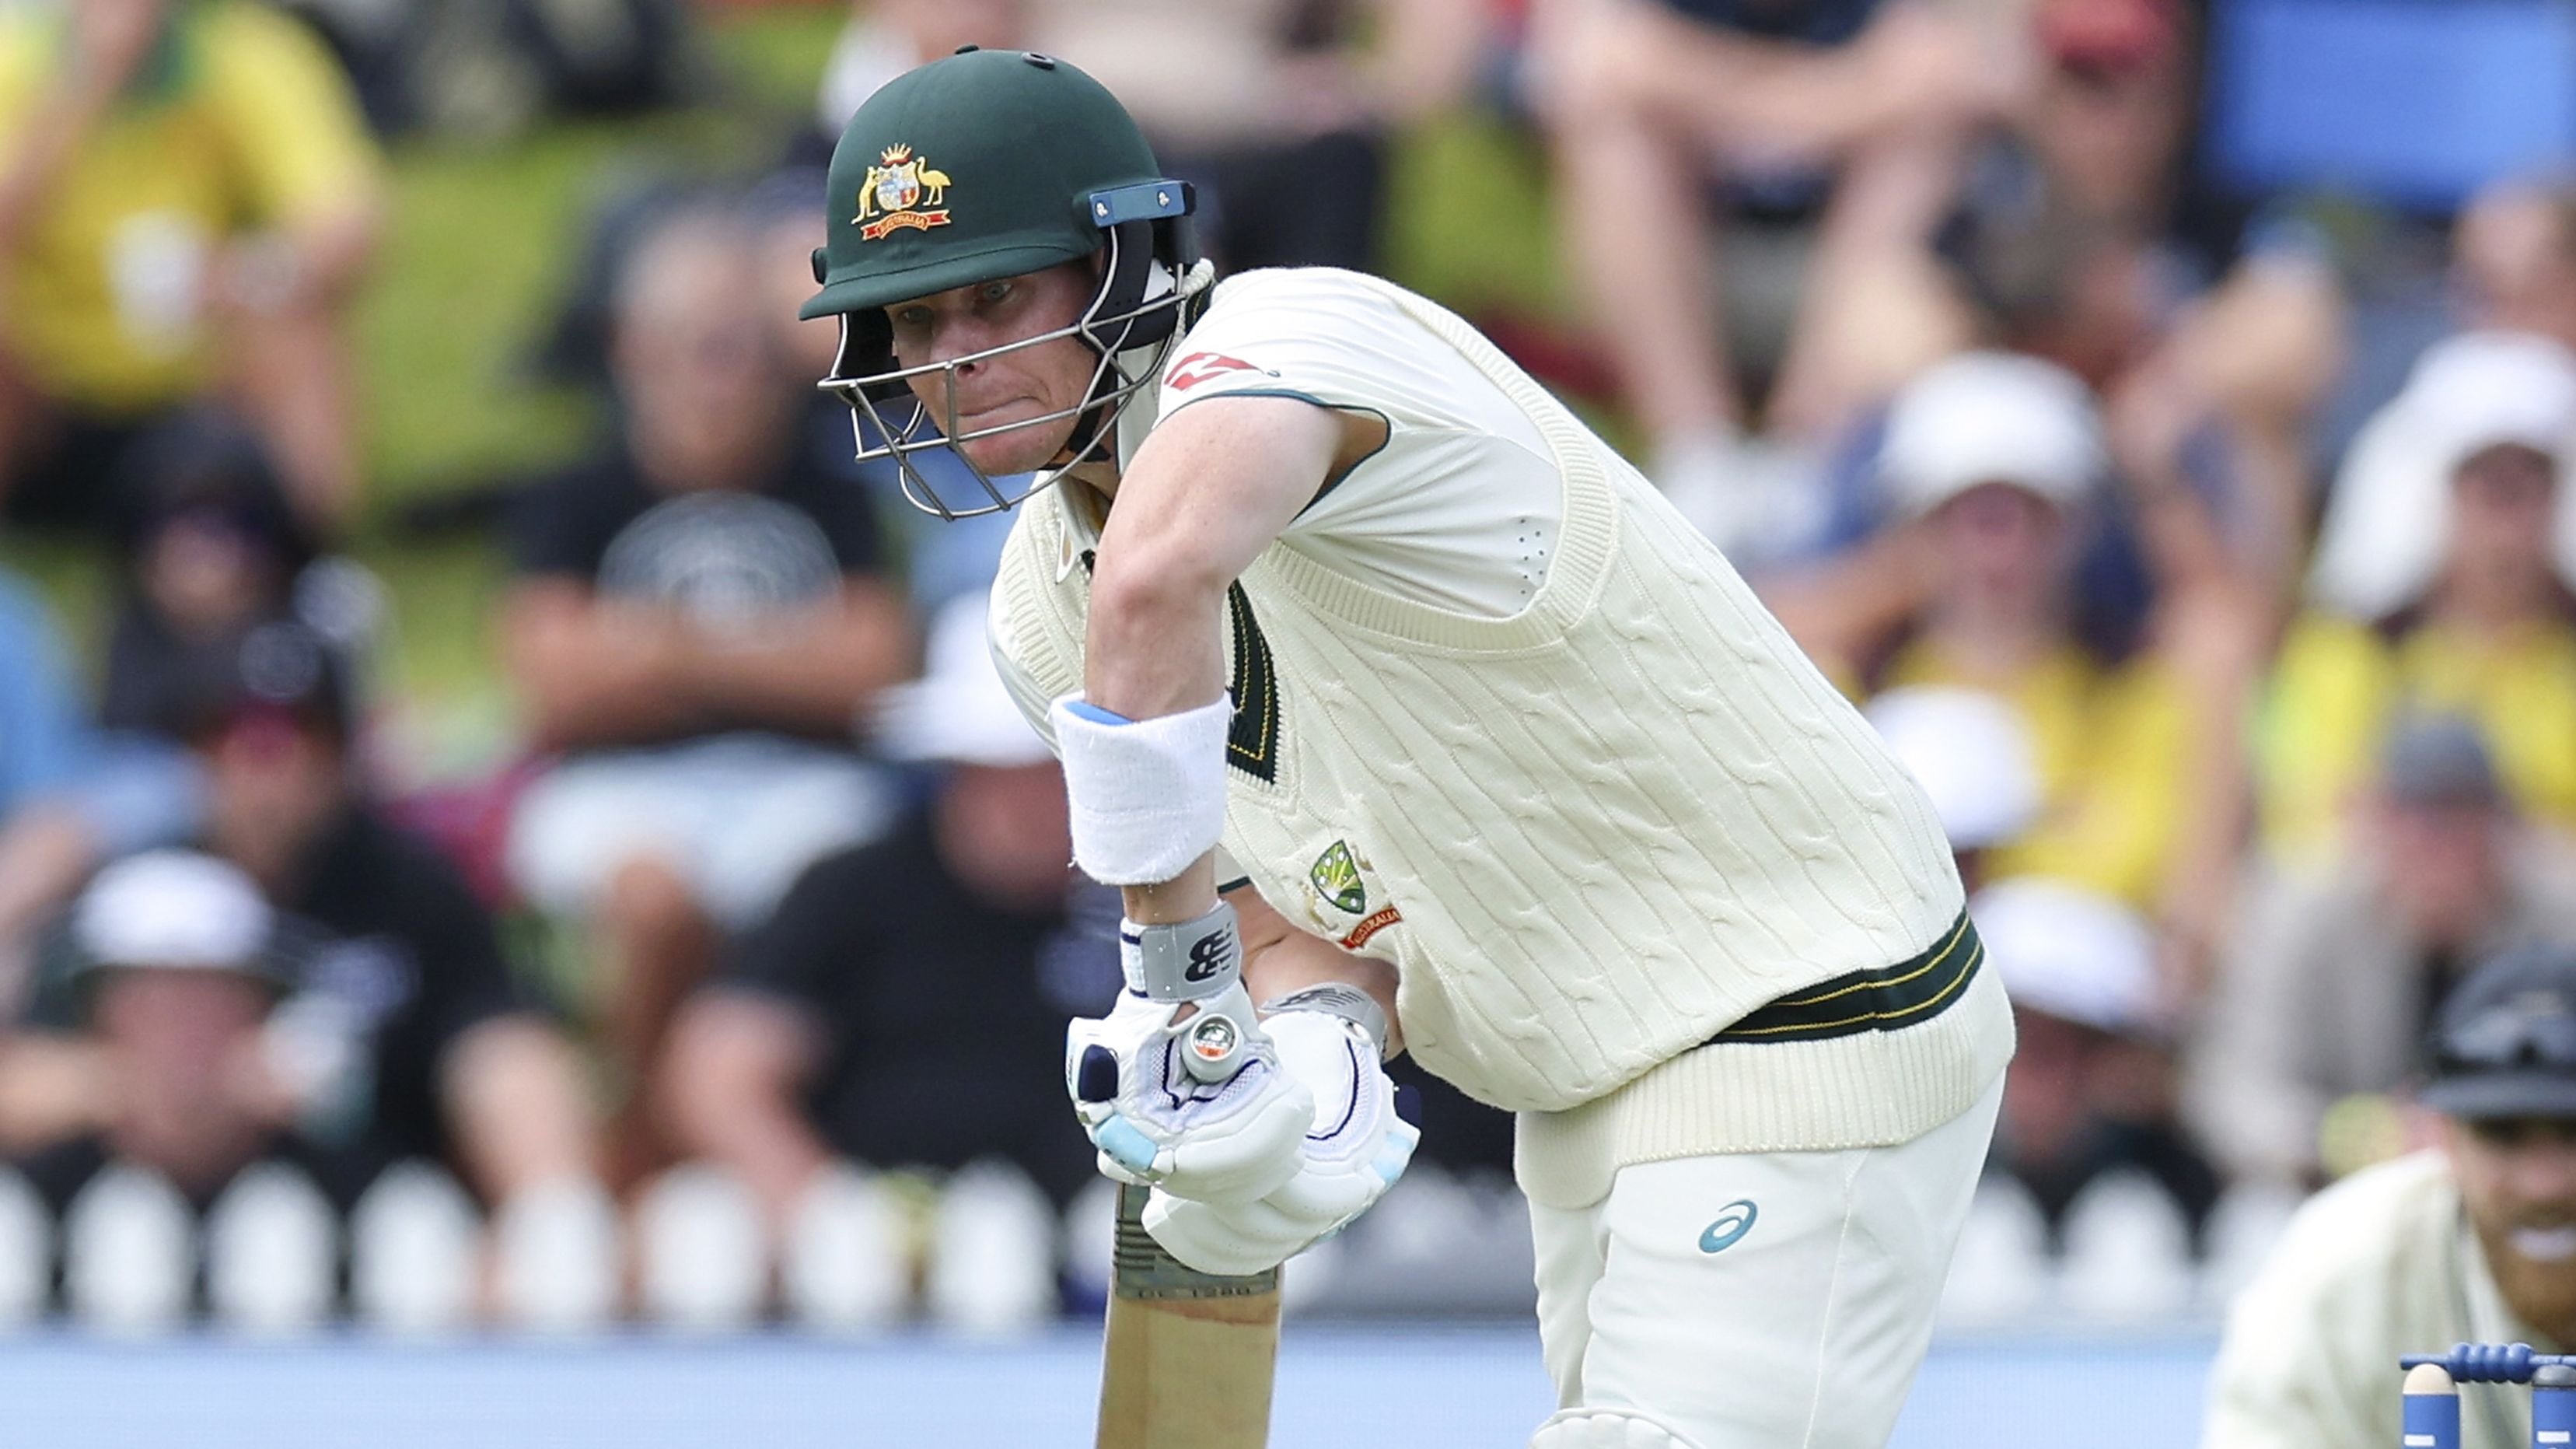 Astounding Steve Smith fact exposed by near-decade low in Test batting rankings